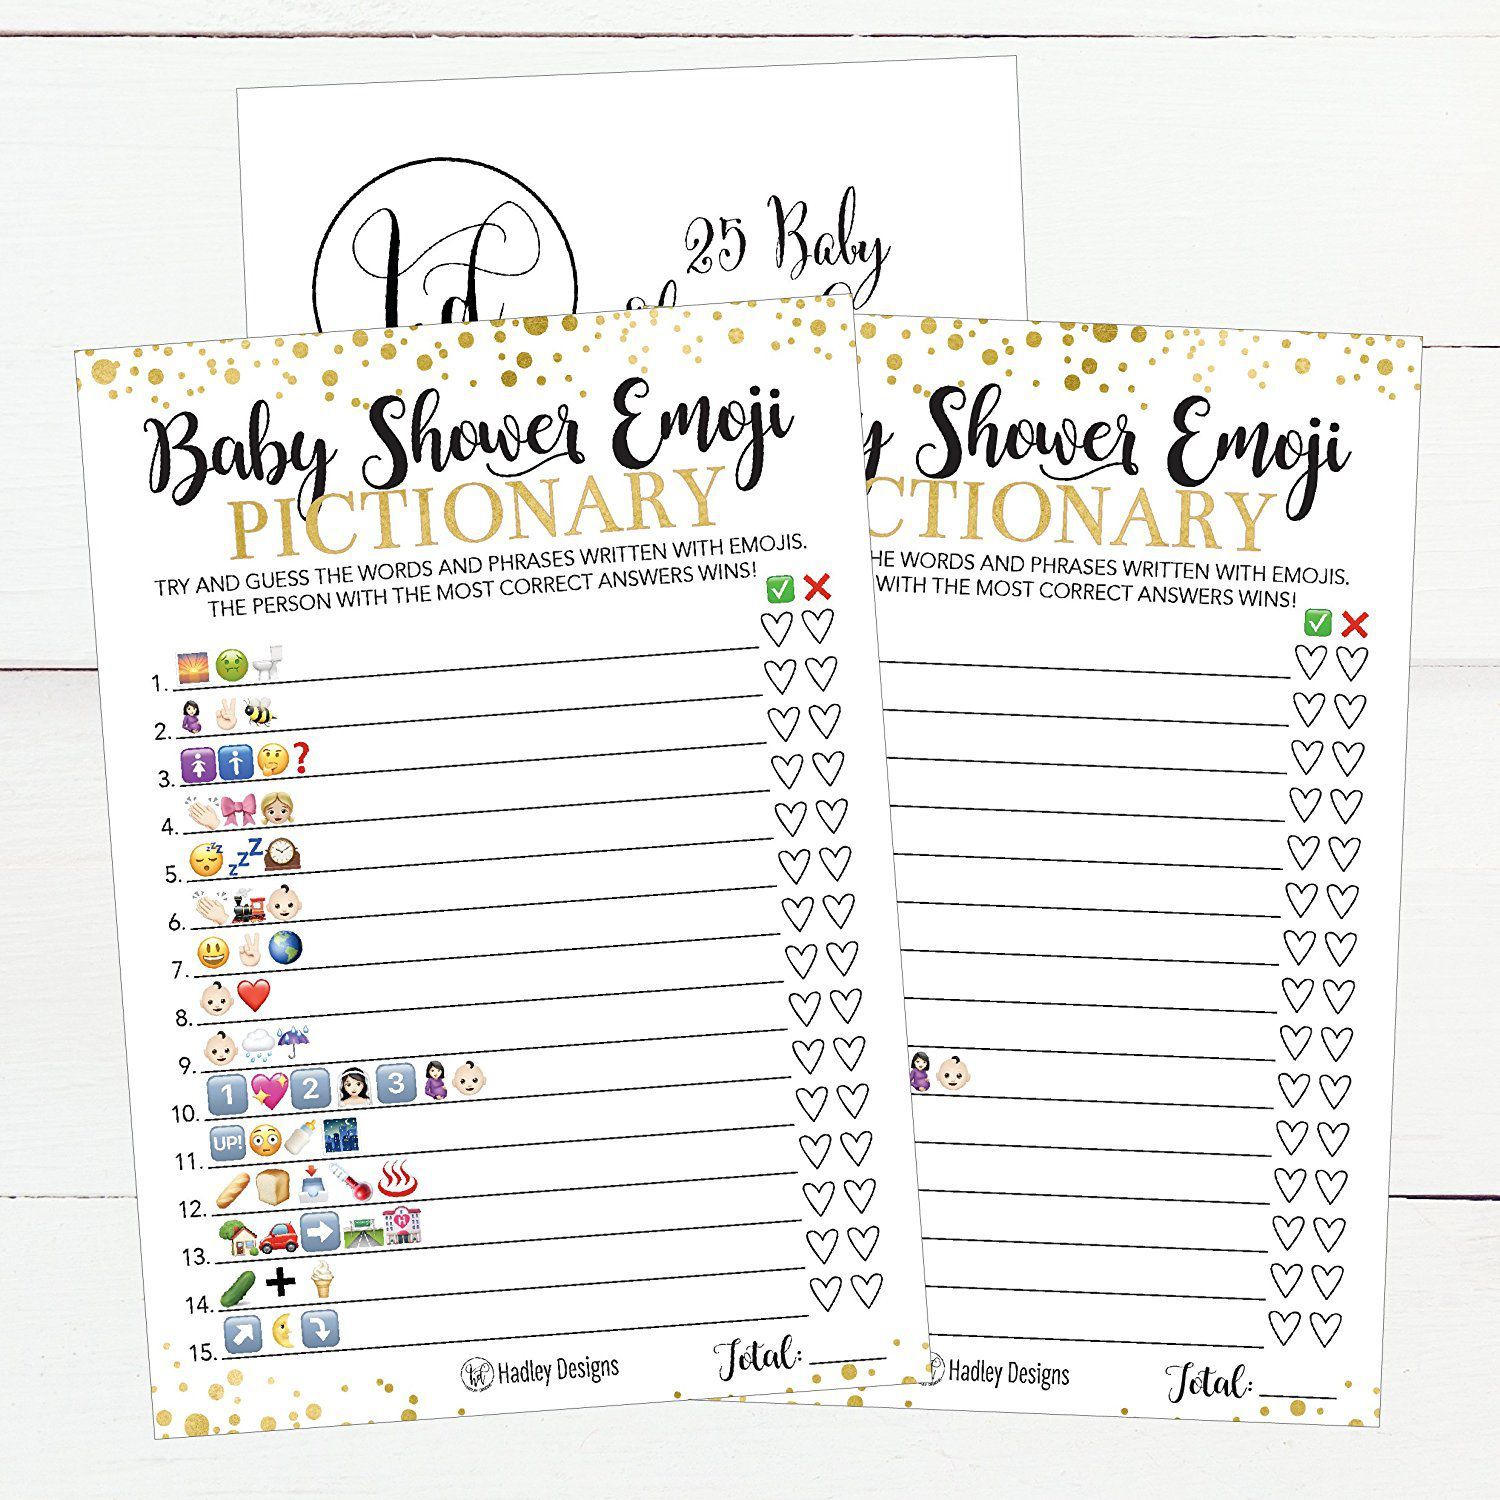 20 Fun Baby Shower Games Best Games To Play At A Baby Shower